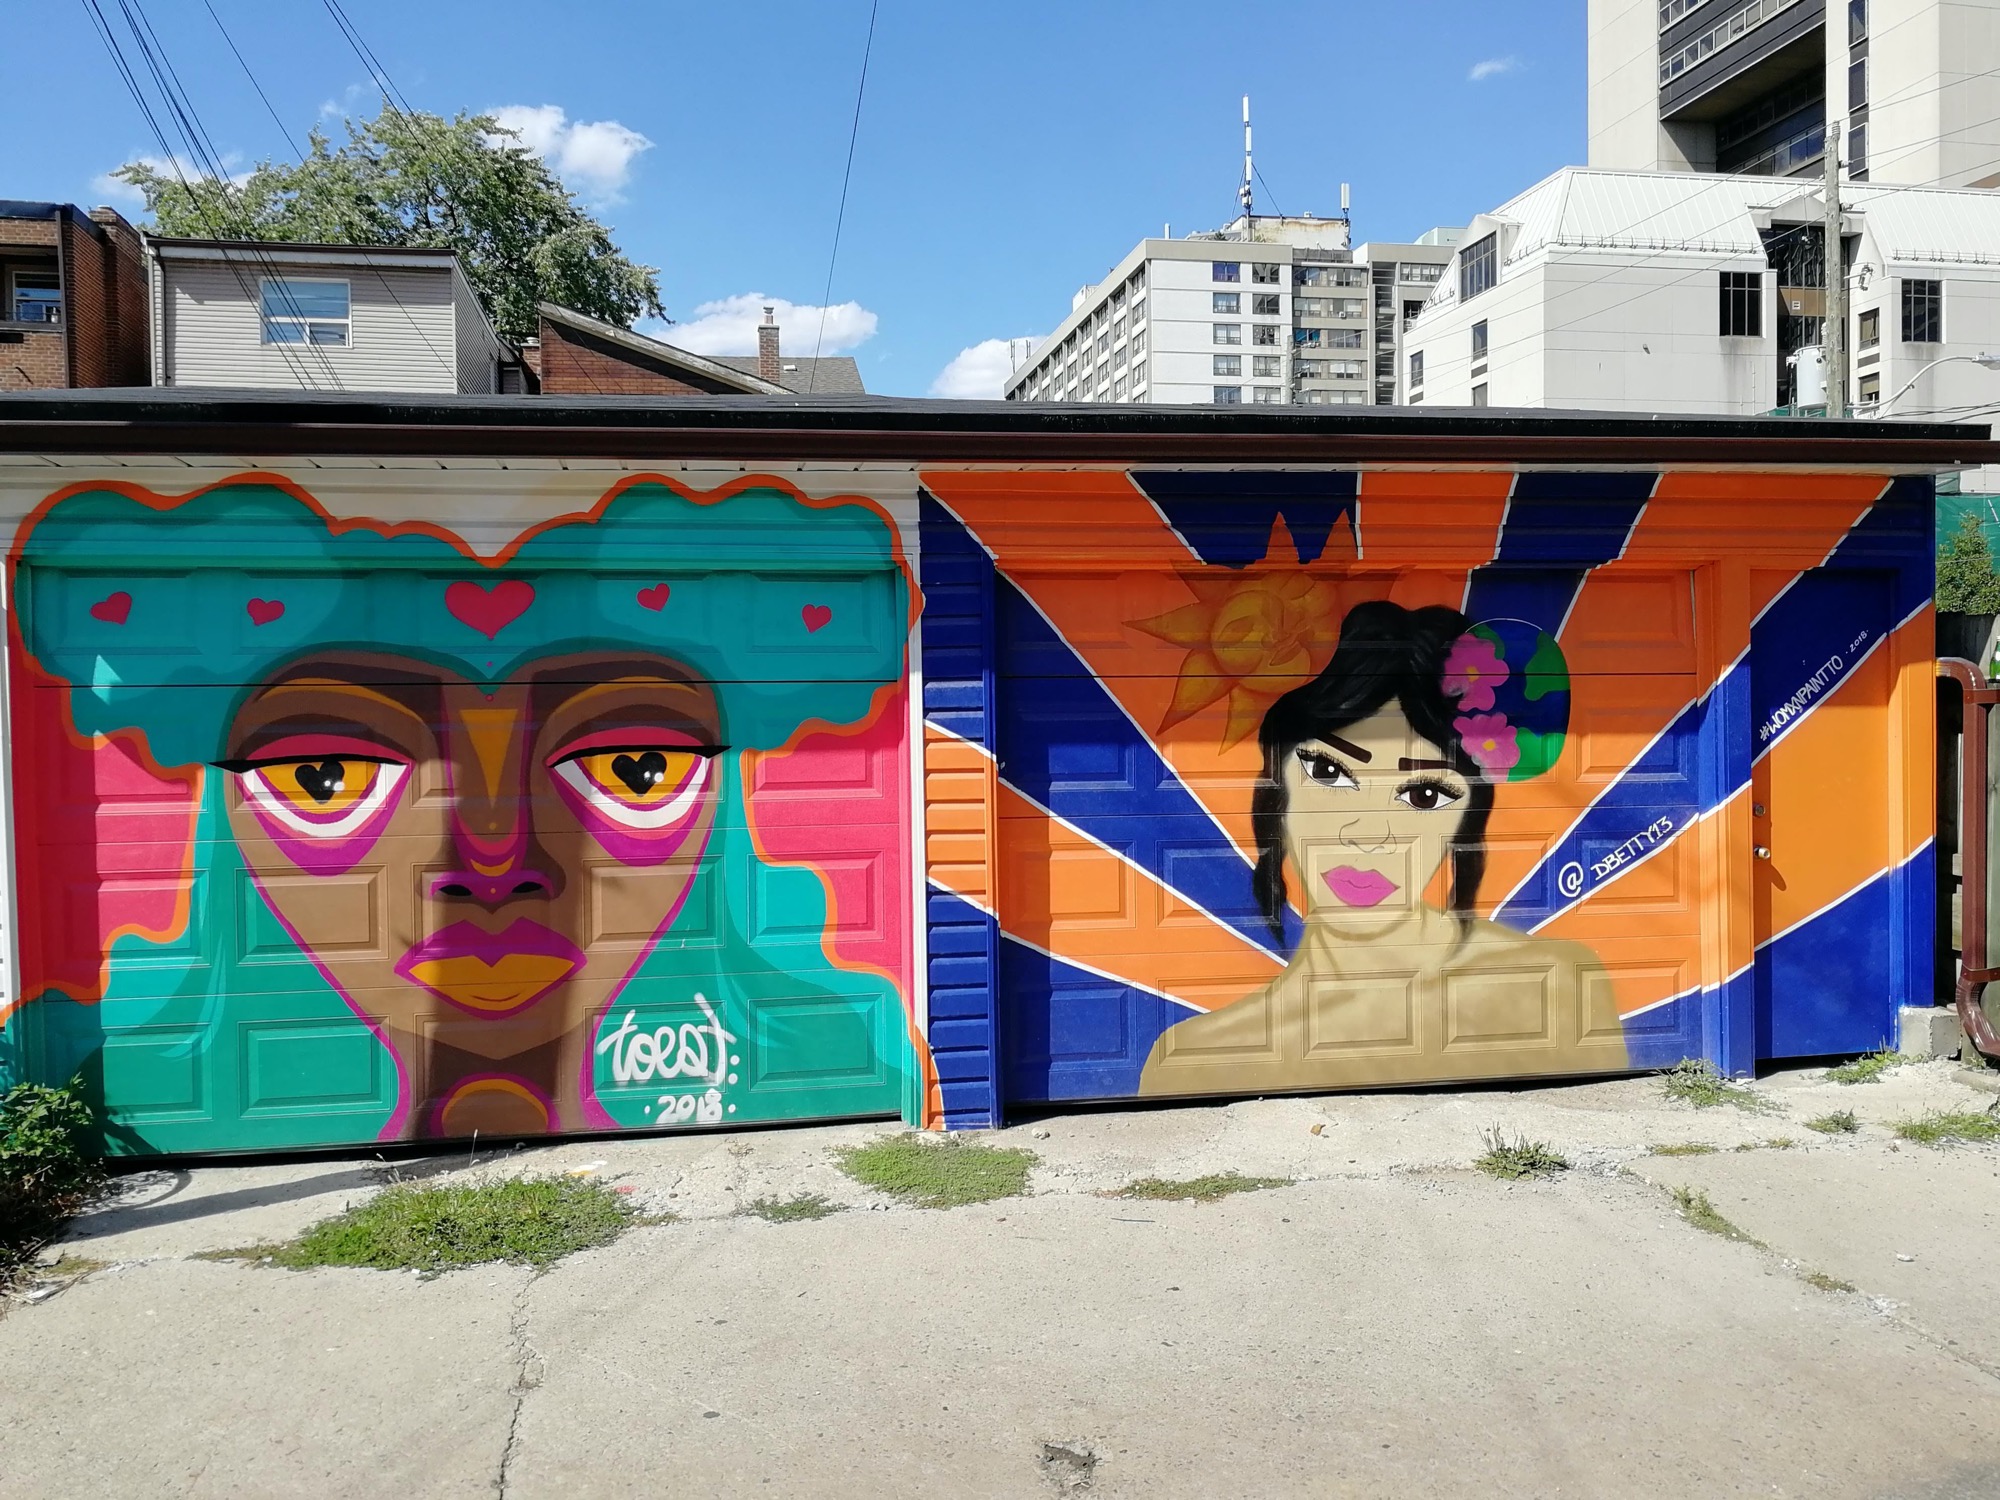 Graffiti 2339  captured by Rabot in Toronto Canada